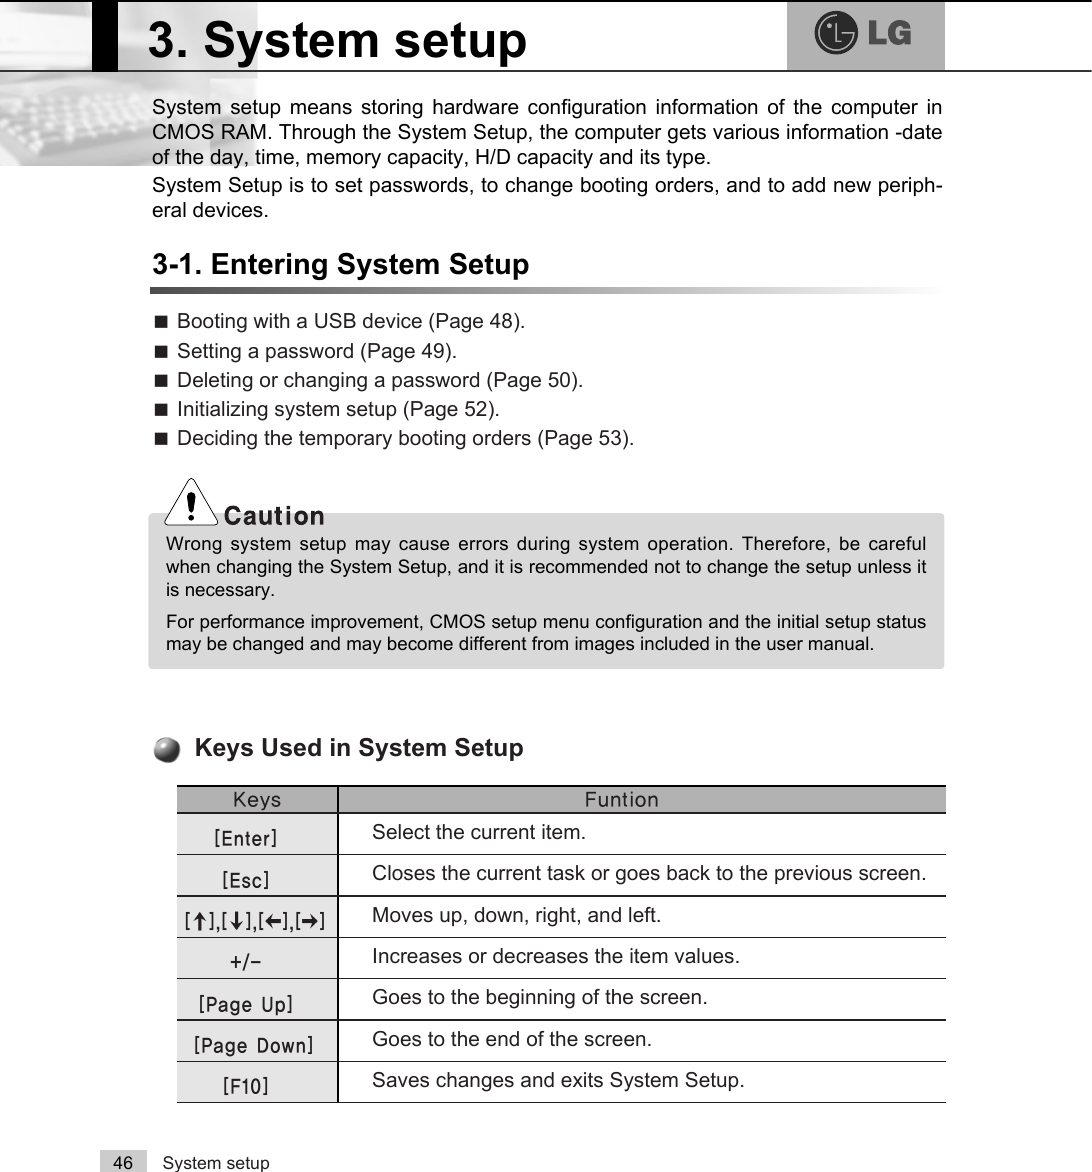 System setup46System setup means storing hardware configuration information of the computer inCMOS RAM. Through the System Setup, the computer gets various information -dateof the day, time, memory capacity, H/D capacity and its type. System Setup is to set passwords, to change booting orders, and to add new periph-eral devices.3-1. Entering System SetupãBooting with a USB device (Page 48).ãSetting a password (Page 49).ãDeleting or changing a password (Page 50).ãInitializing system setup (Page 52).ãDeciding the temporary booting orders (Page 53)..H\V )XQWLRQSelect the current item.&gt;(QWHU@Closes the current task or goes back to the previous screen.&gt;(VF@Moves up, down, right, and left. &gt;Ⓑ@&gt;Ⓒ@&gt;⒵@&gt;Ⓐ@Increases or decreases the item values. Goes to the beginning of the screen. Goes to the end of the screen. Saves changes and exits System Setup. &gt;3DJH8S@&gt;3DJH&apos;RZQ@&gt;)@Keys Used in System Setup 3. System setupWrong system setup may cause errors during system operation. Therefore, be carefulwhen changing the System Setup, and it is recommended not to change the setup unless itis necessary. For performance improvement, CMOS setup menu configuration and the initial setup statusmay be changed and may become different from images included in the user manual.